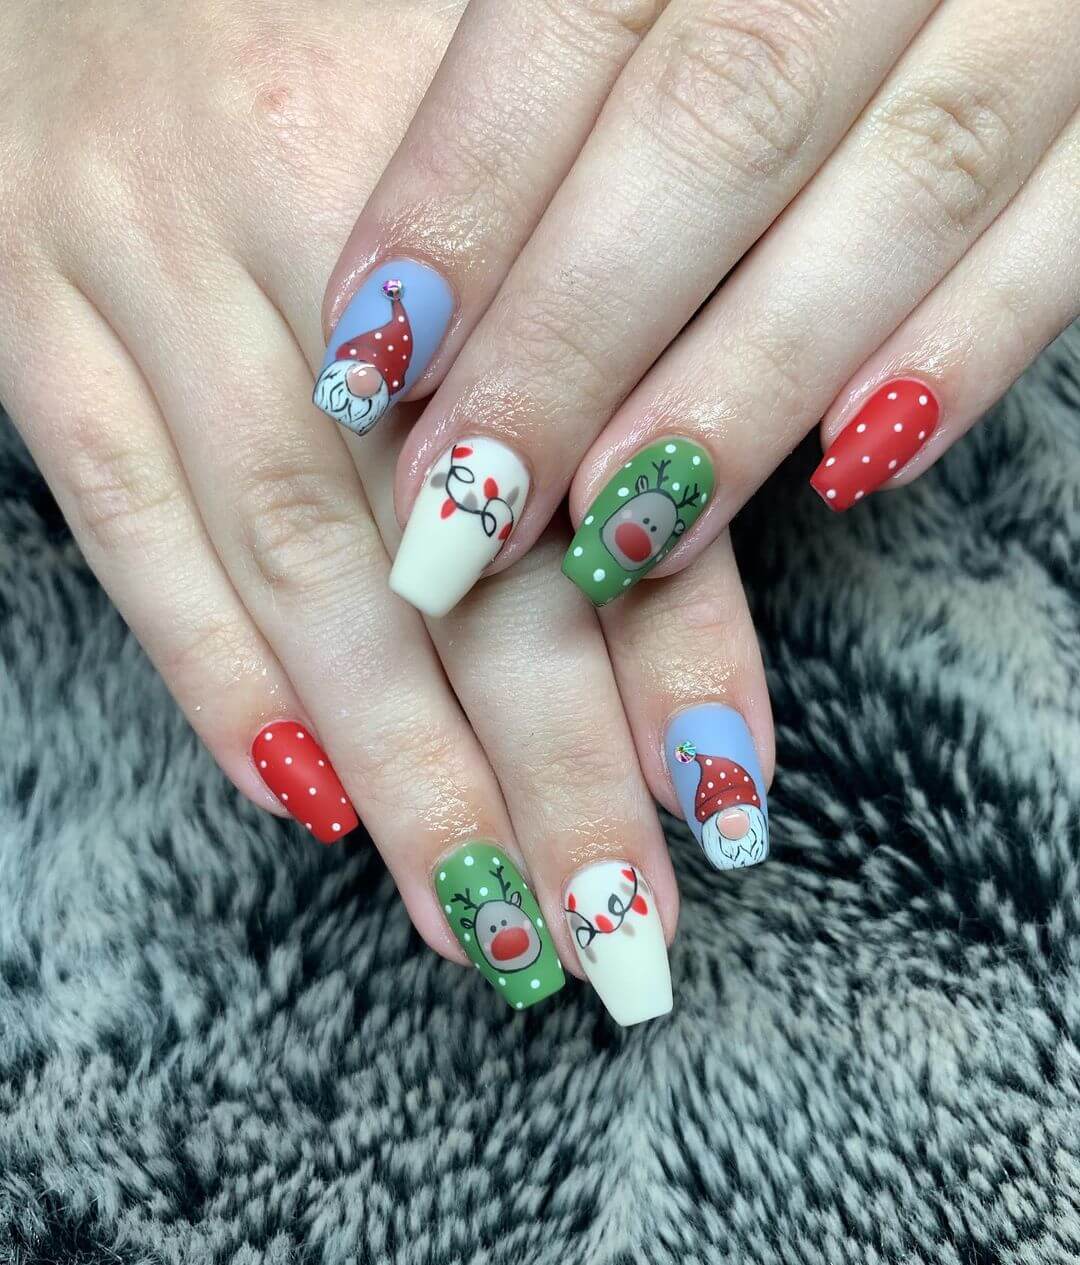 Colorful nails this Christmas